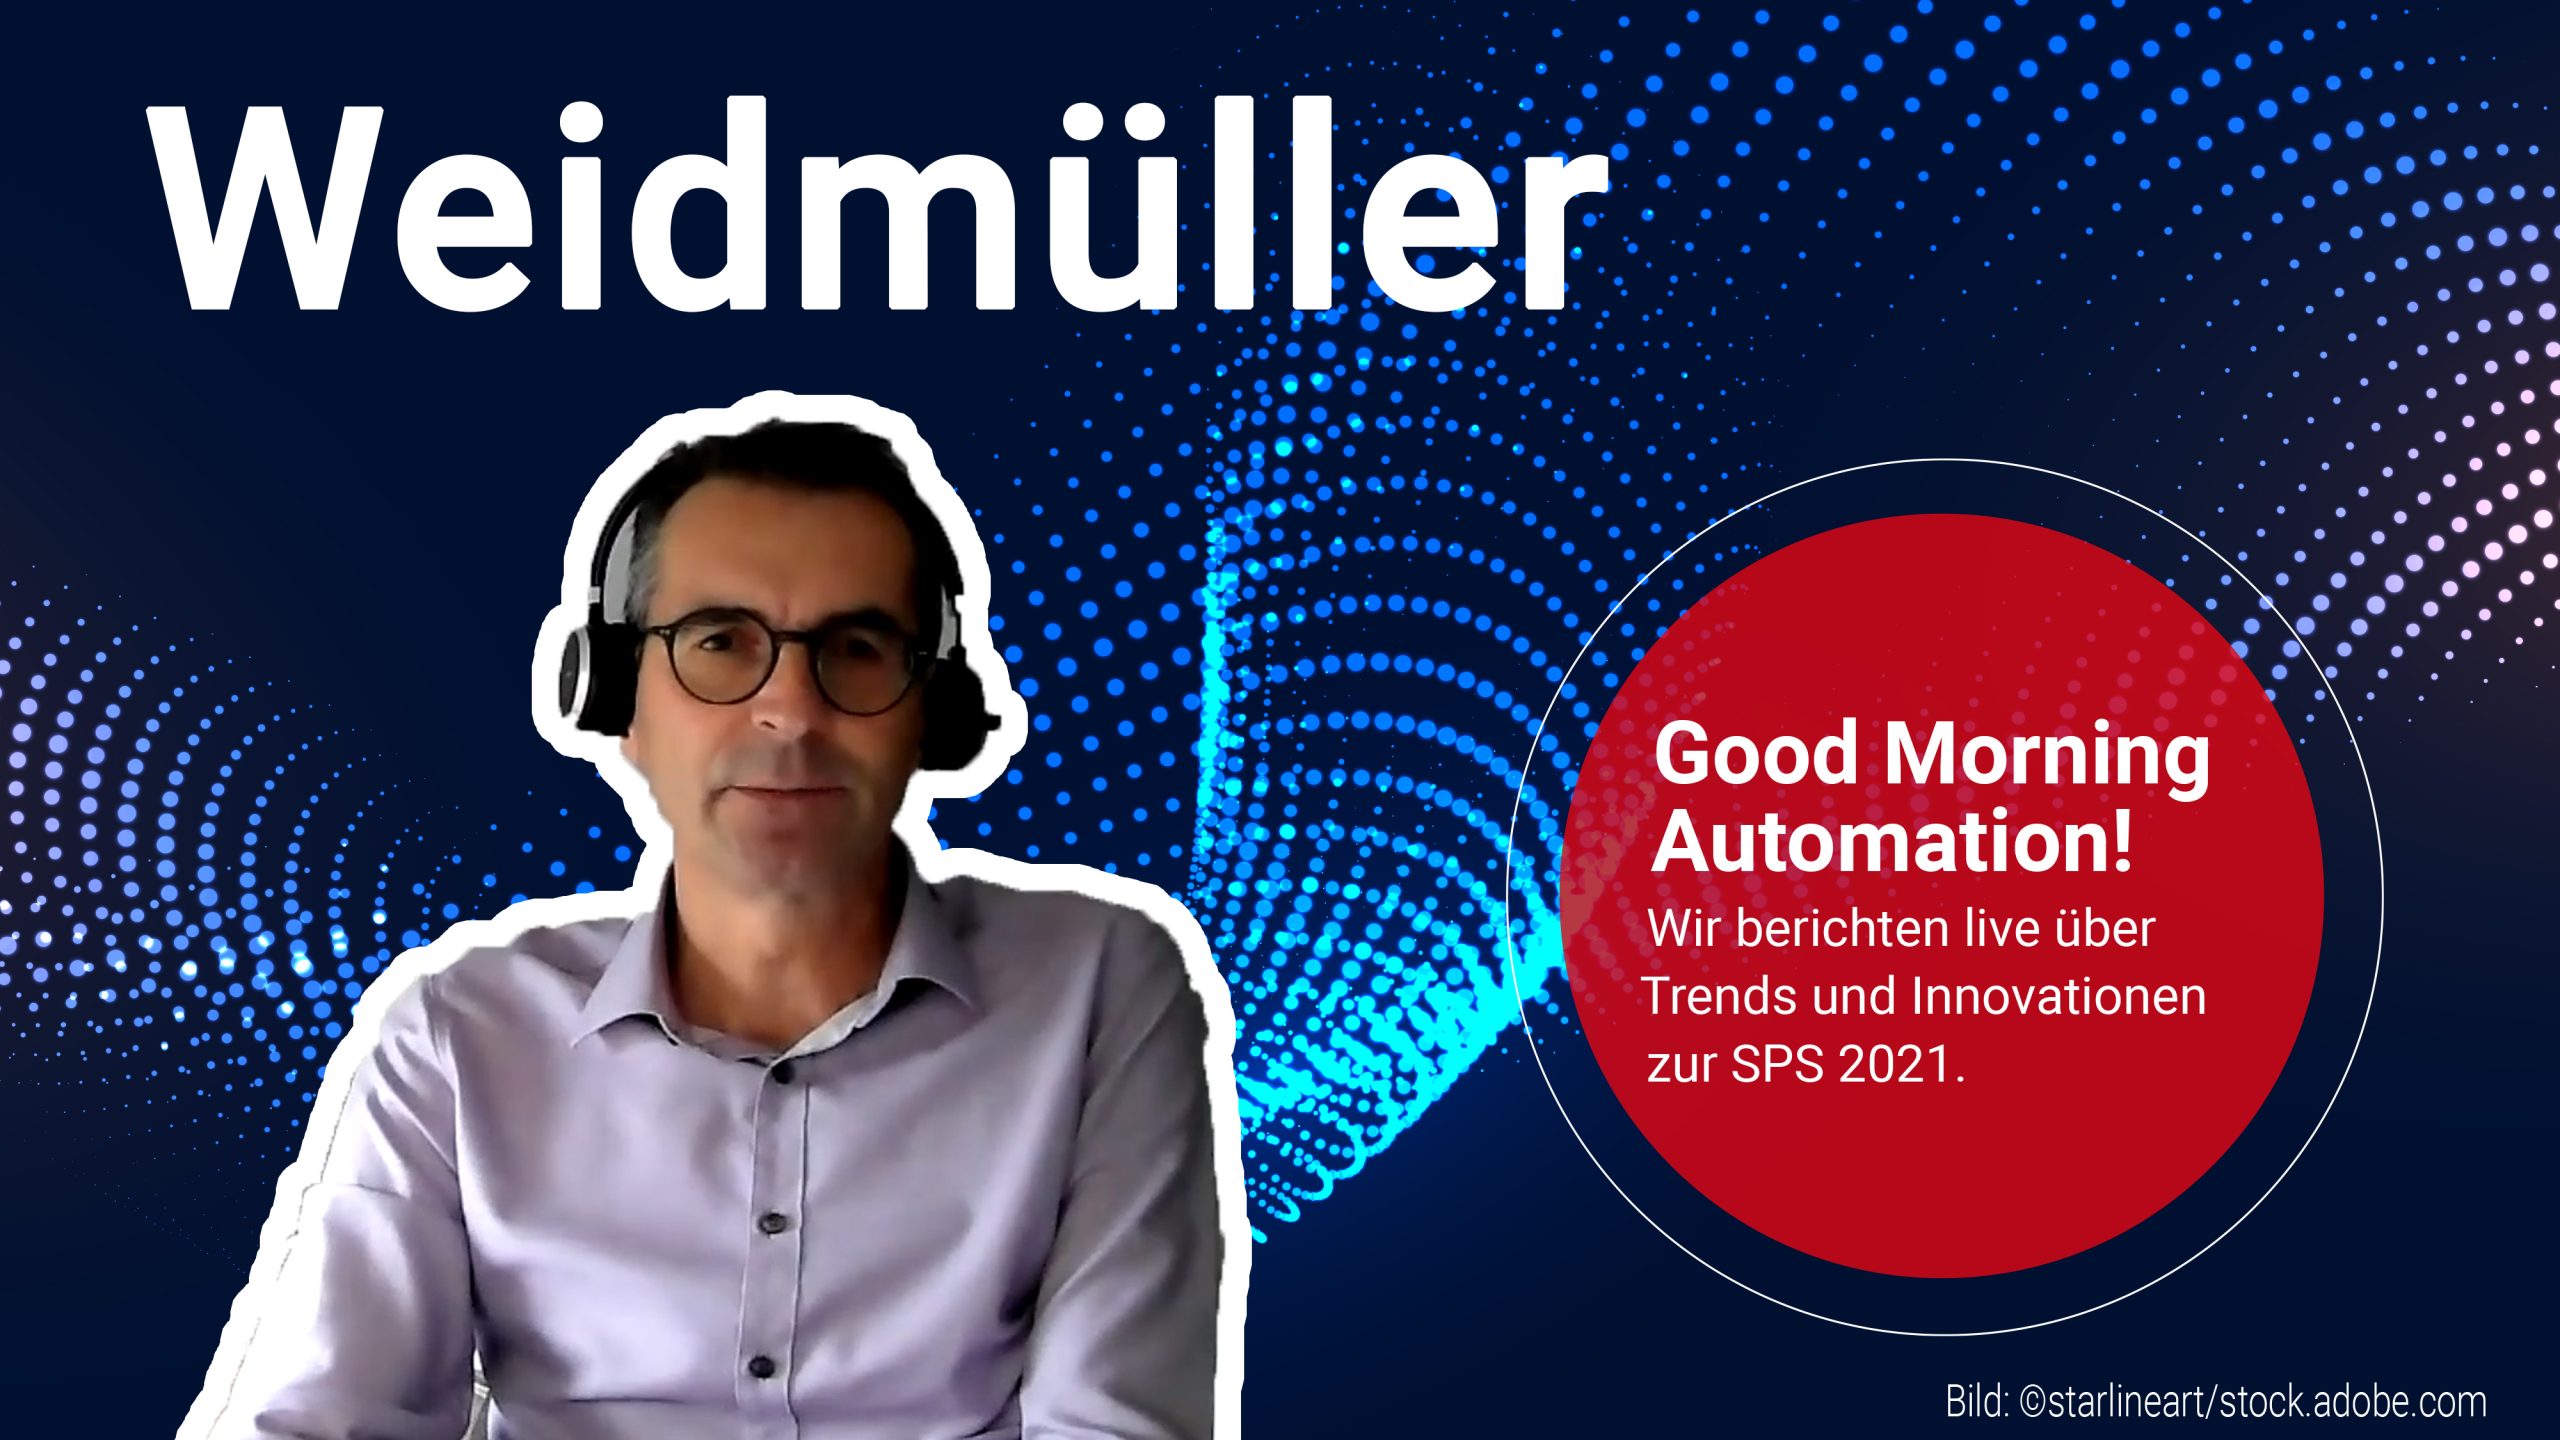 Weidmüller bei Good Morning Automation Tag 2